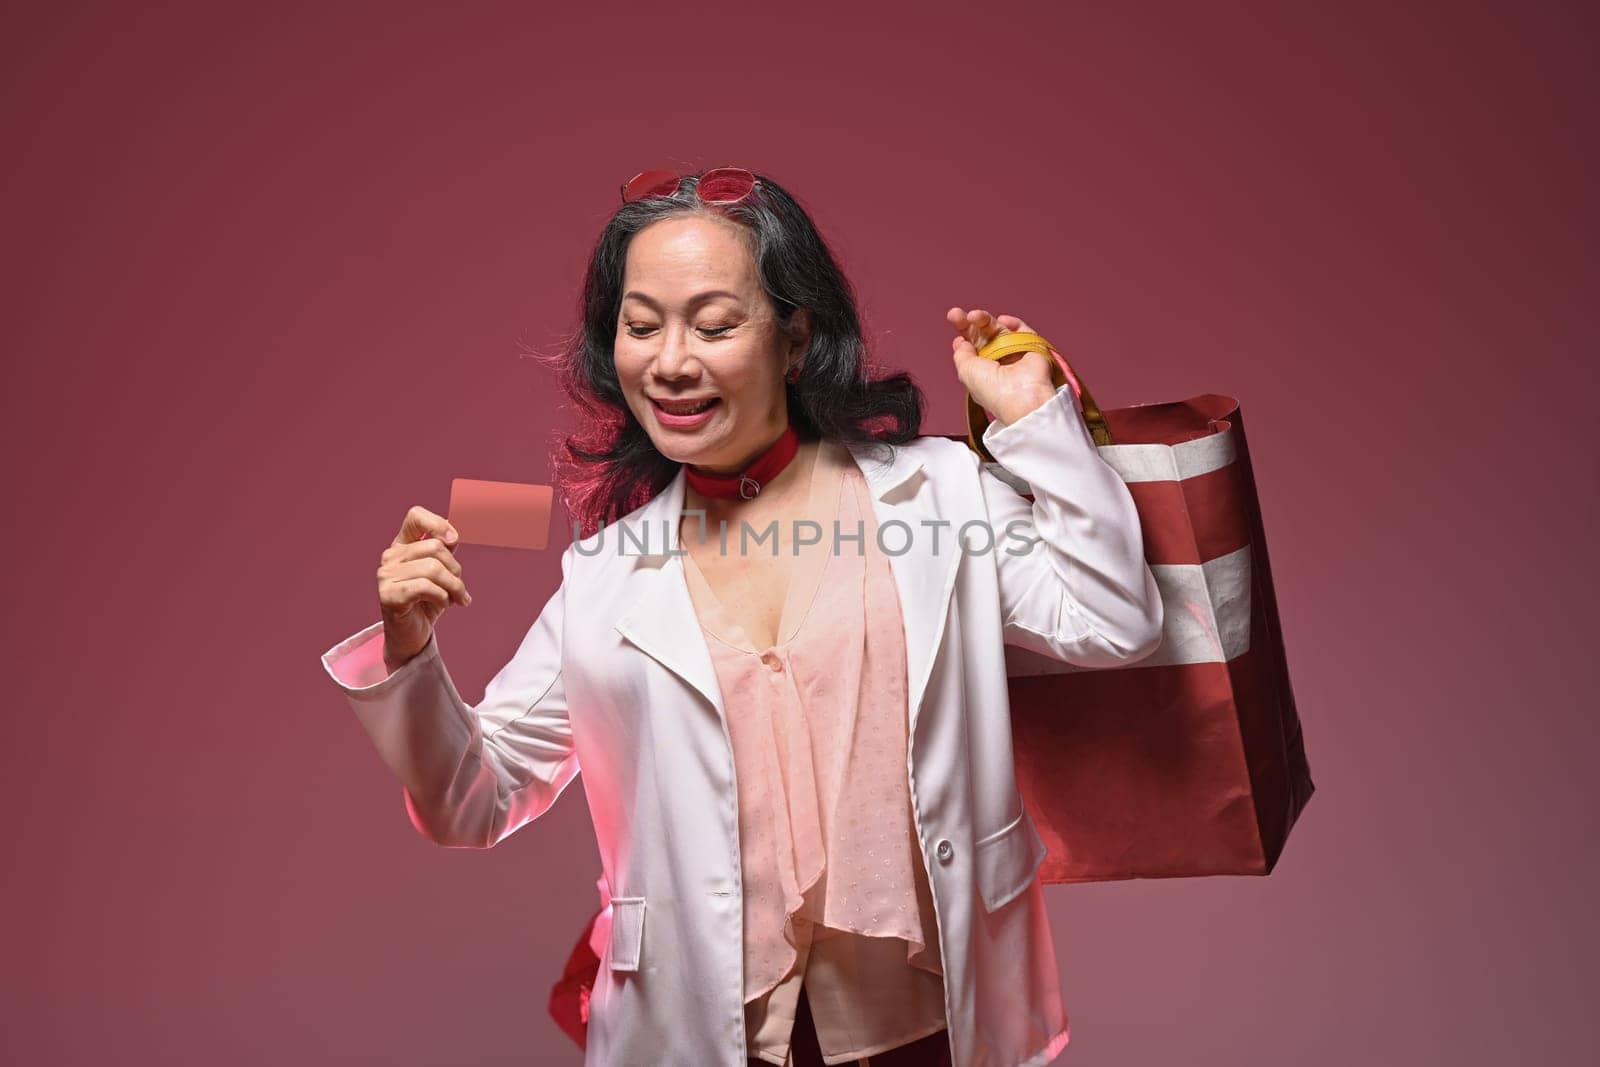 Stylish middle aged woman holding credit card and shopping bags over red background.